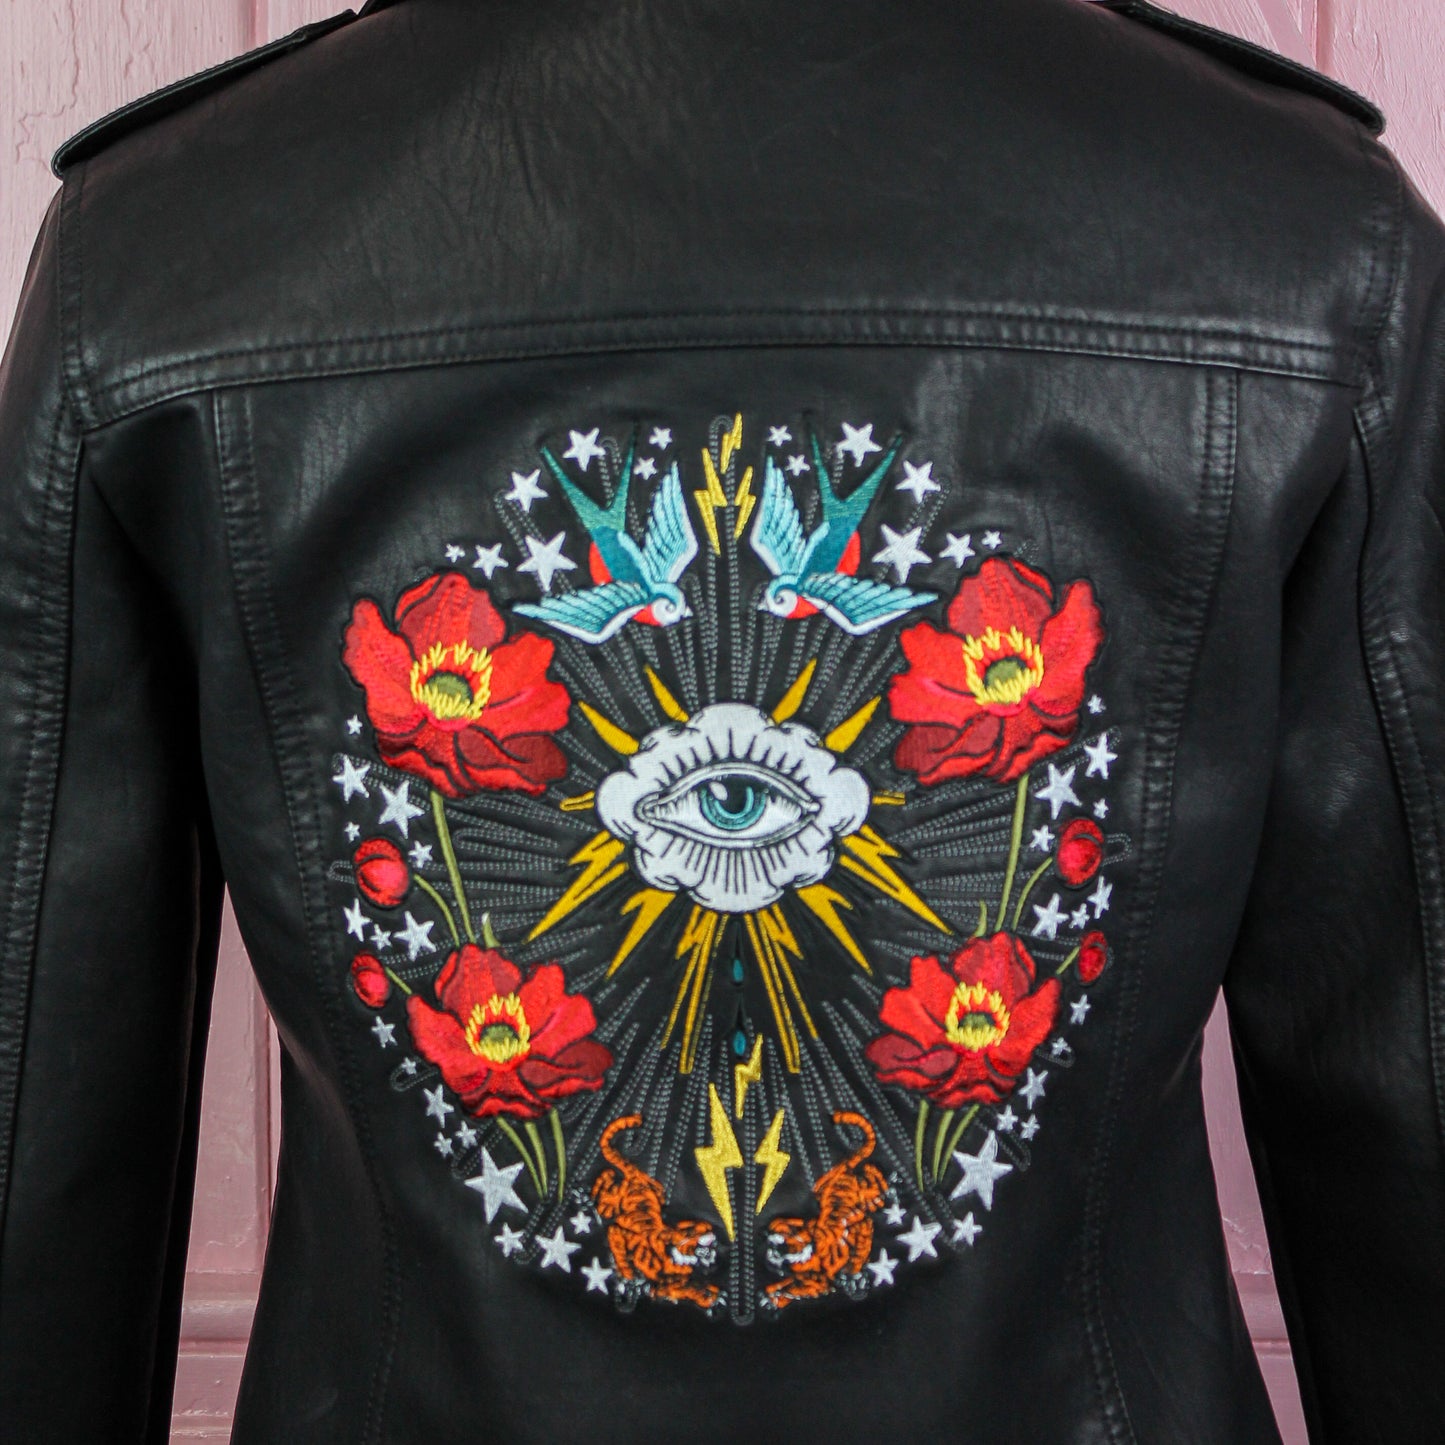 Gothic wedding leather jacket adorned with elegant embroidery, a stylish cover-up for the modern bride